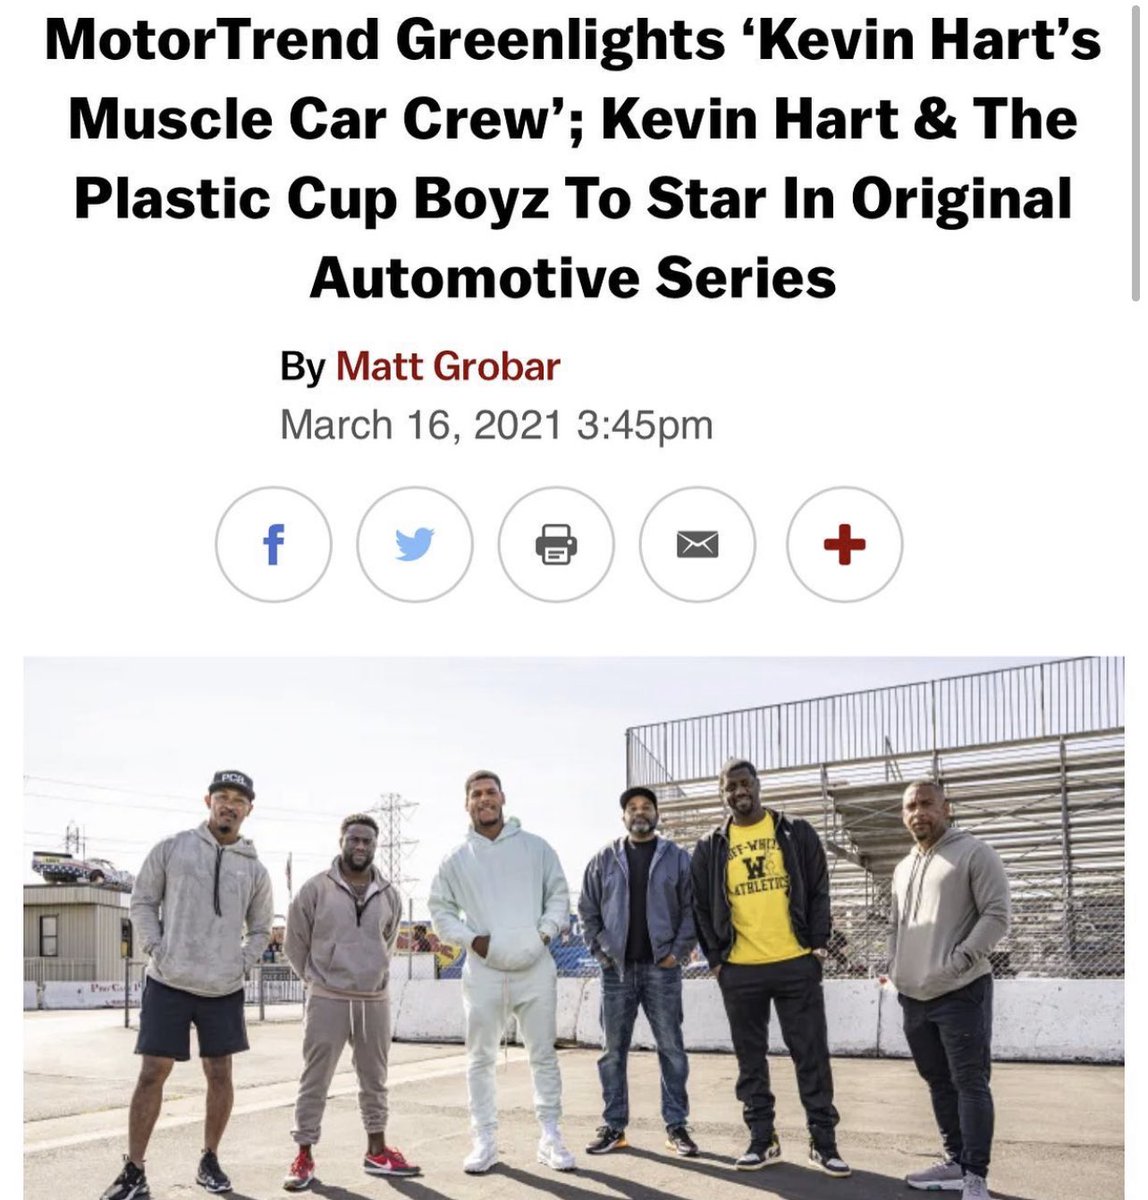 Let’s goooooo!!!!!!! @kevinhart4real’s Muscle Car Crew, featuring the @plasticcupboyzcarclub, premieres on the @MotorTrendApp this summer! 🥤 🔥 Head over to our link in bio for more details! #plasticcupboyz #motortrend